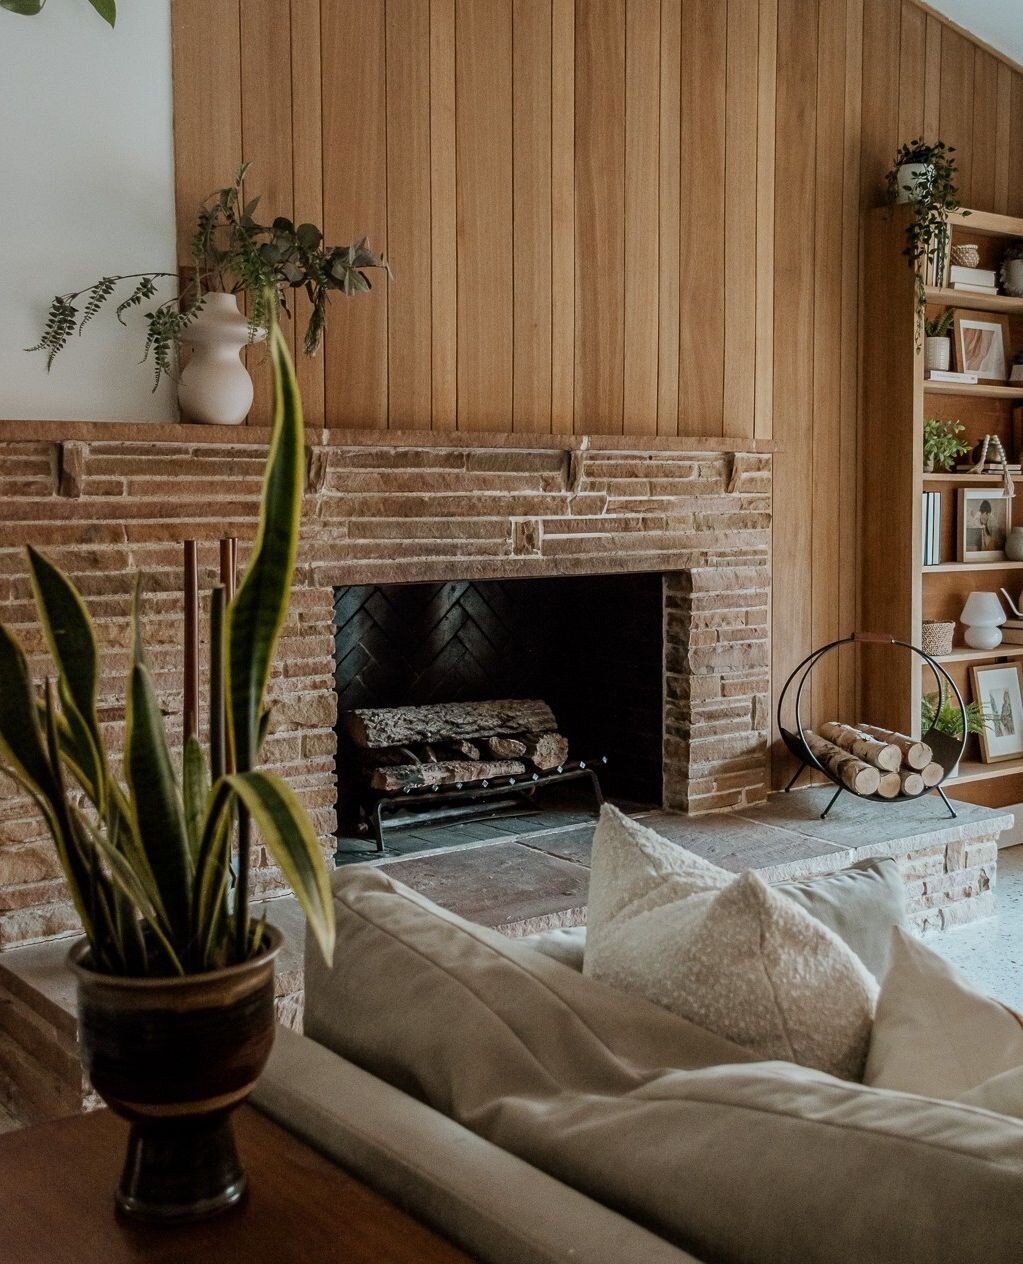 Bringing back the soul of this mid-century gem! ✨ Swipe to see the before to truly appreciate the stunning transformation of this living room, where we unveiled the timeless beauty of mahogany wood paneling beneath layers of paint. ⁠
⁠
From dull to d